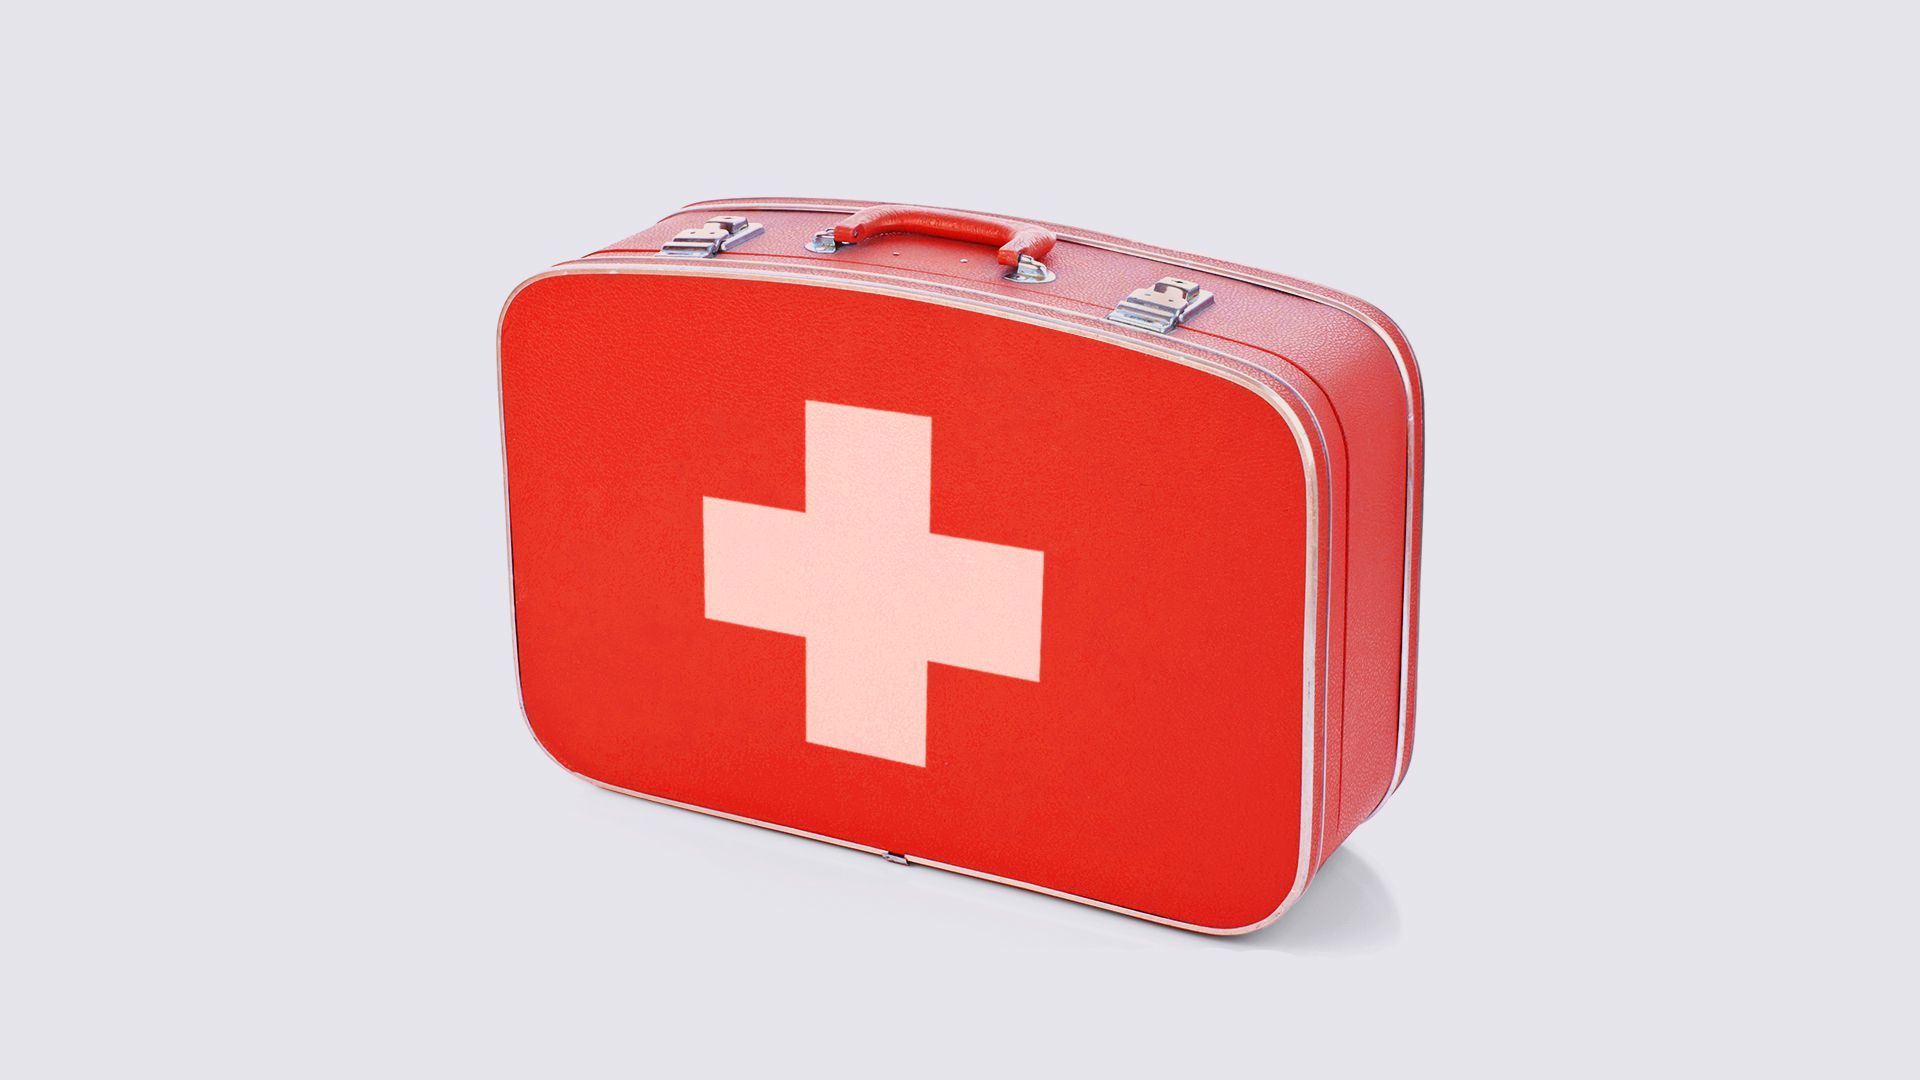 Illustration of a red suitcase with a medical cross on the side